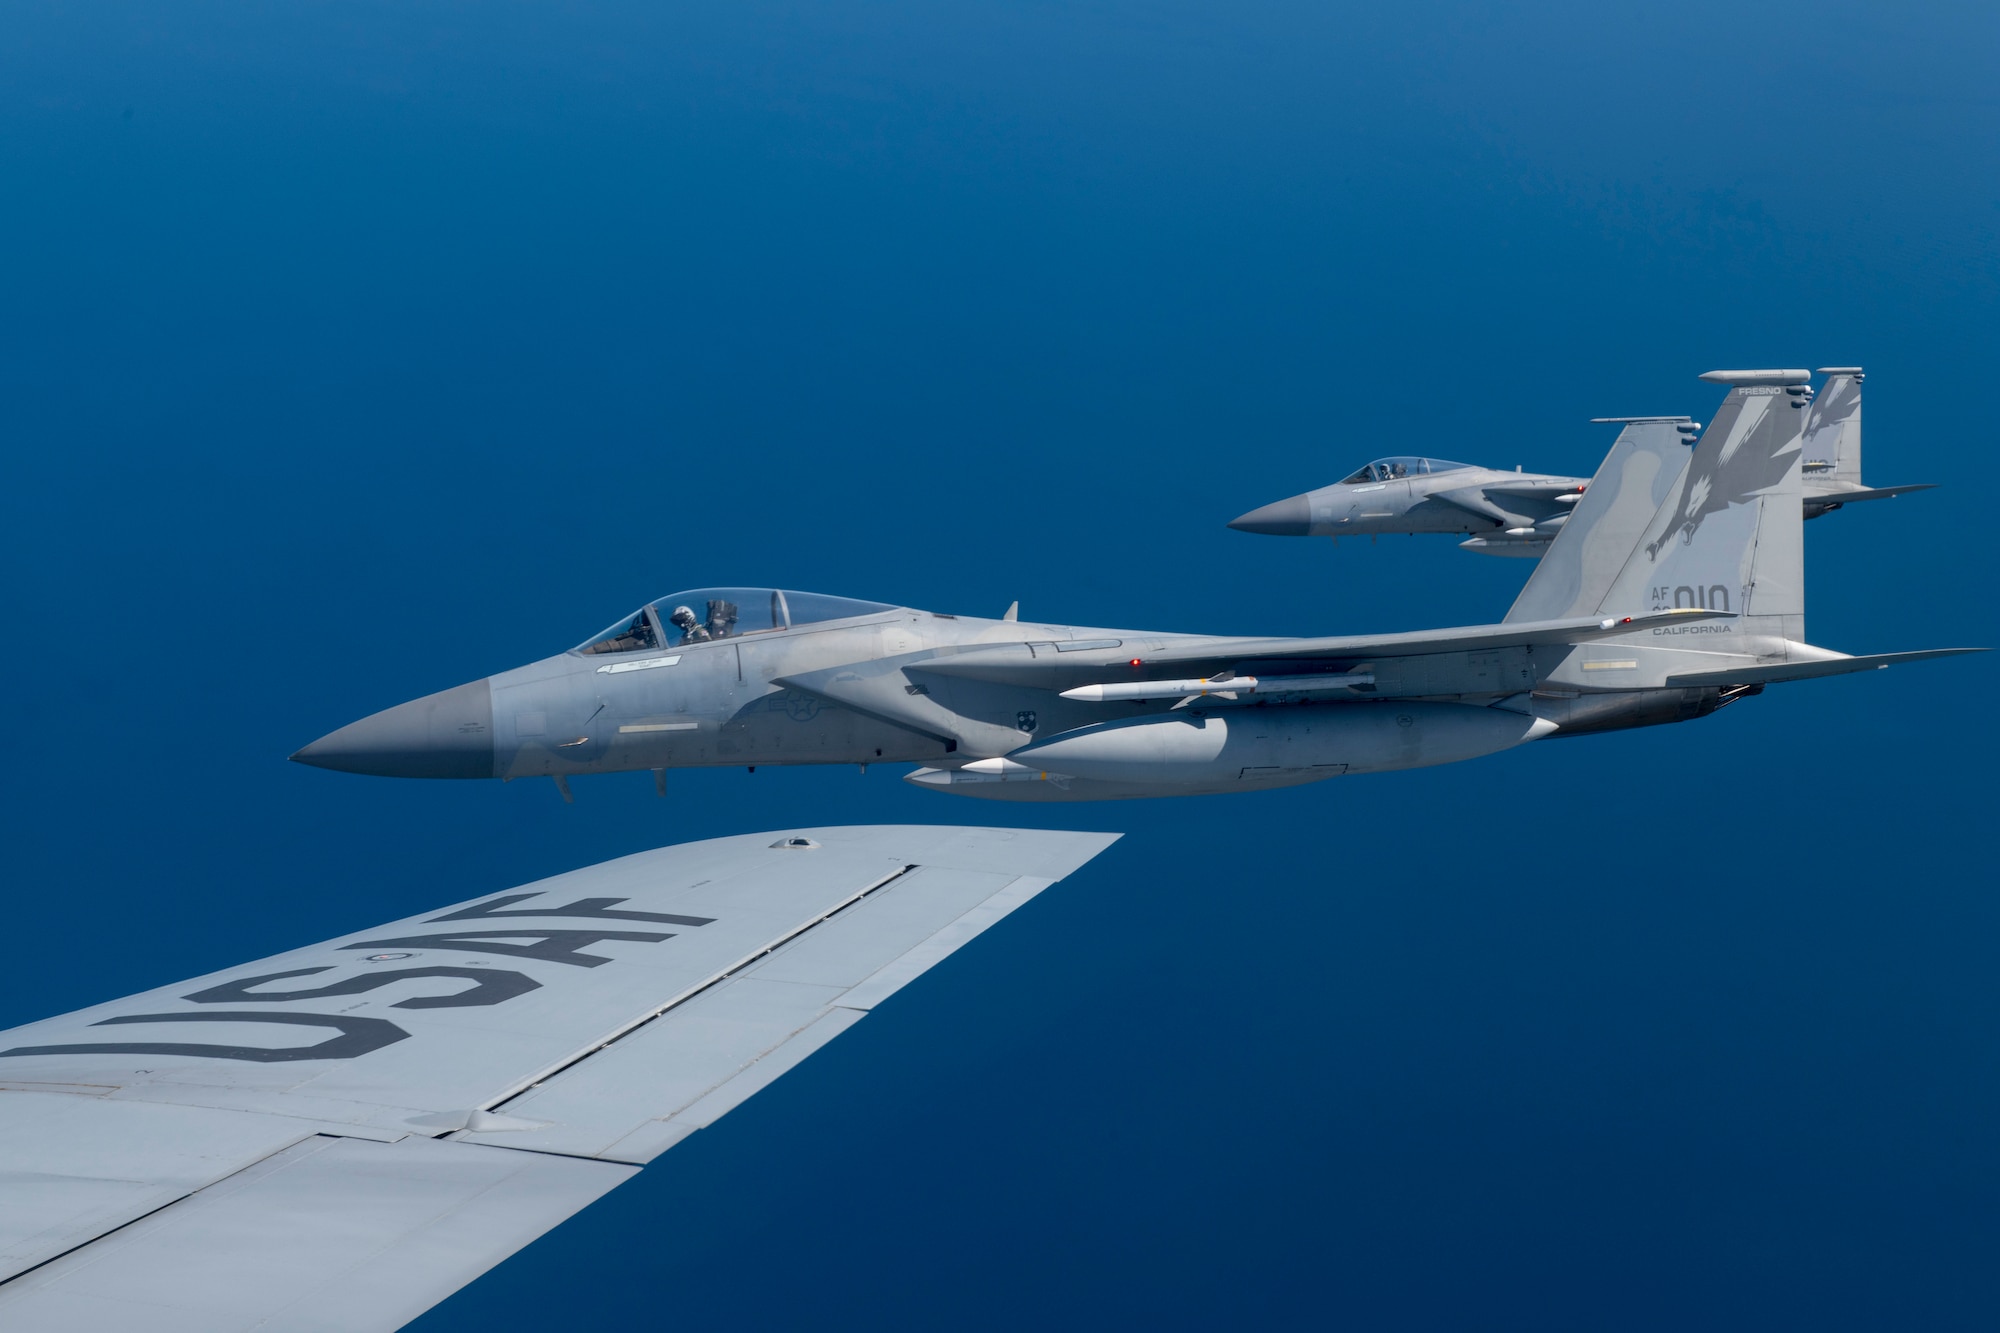 NORAD F-15 jet fighters flew simultaneously off both U.S coasts for Exercise Noble Defender April 6. Noble Defender simulated air defense of ports in the southeast and southwest.